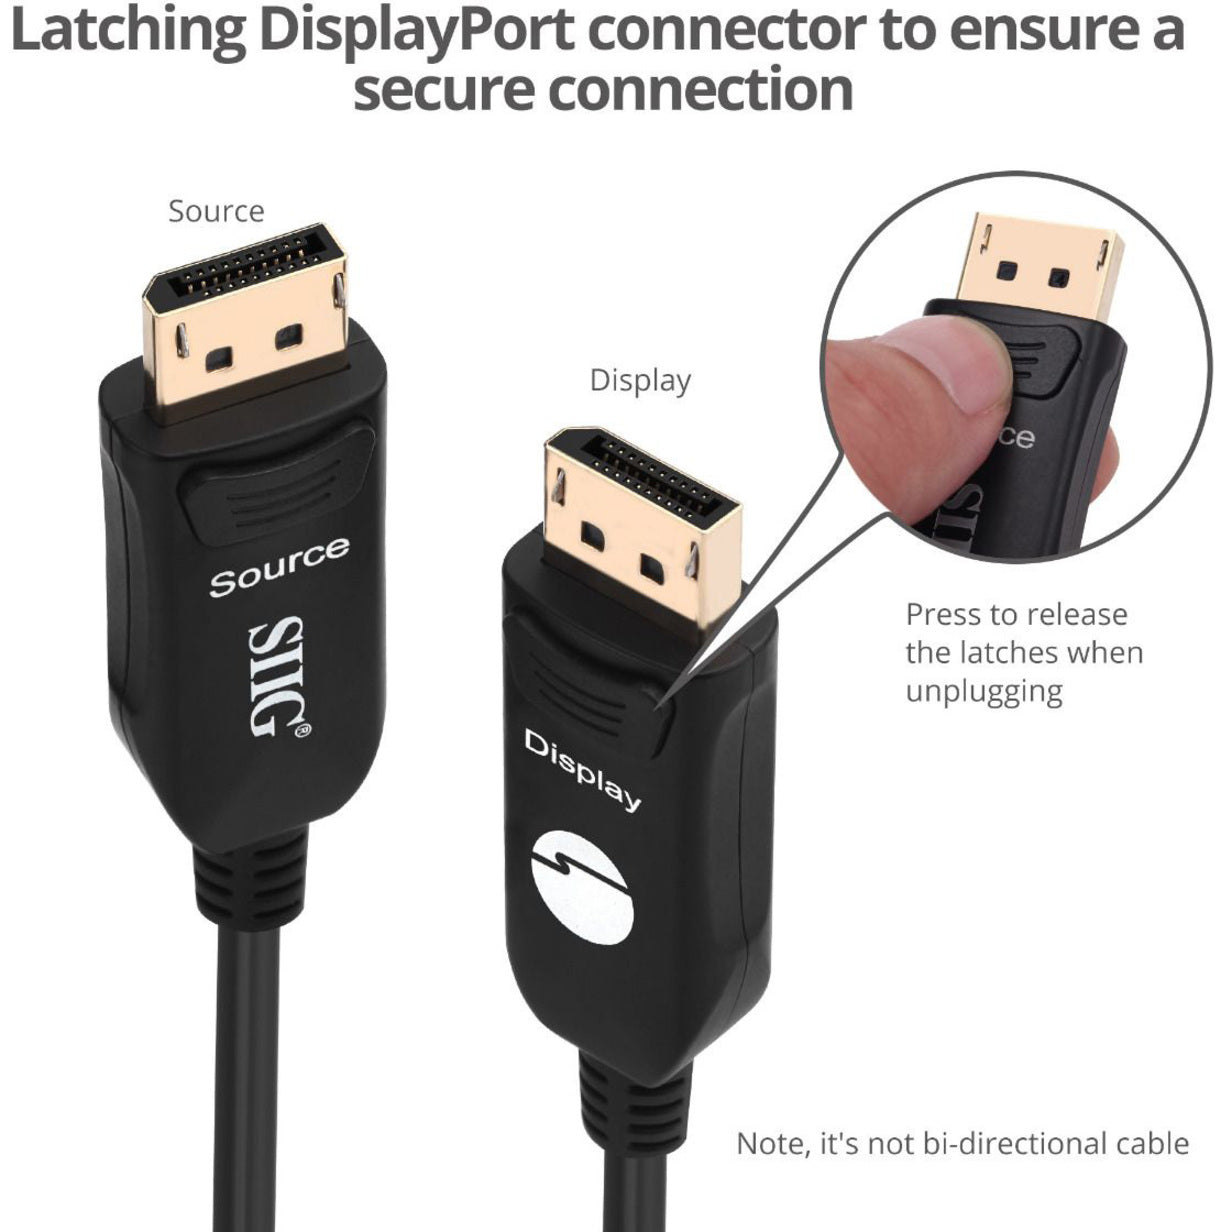 SIIG CB-DP2211-S1 4K DisplayPort 1.2 AOC Cable - 15M, Plug & Play, 21.6 Gbit/s Data Transfer Rate, Gold Plated Connectors